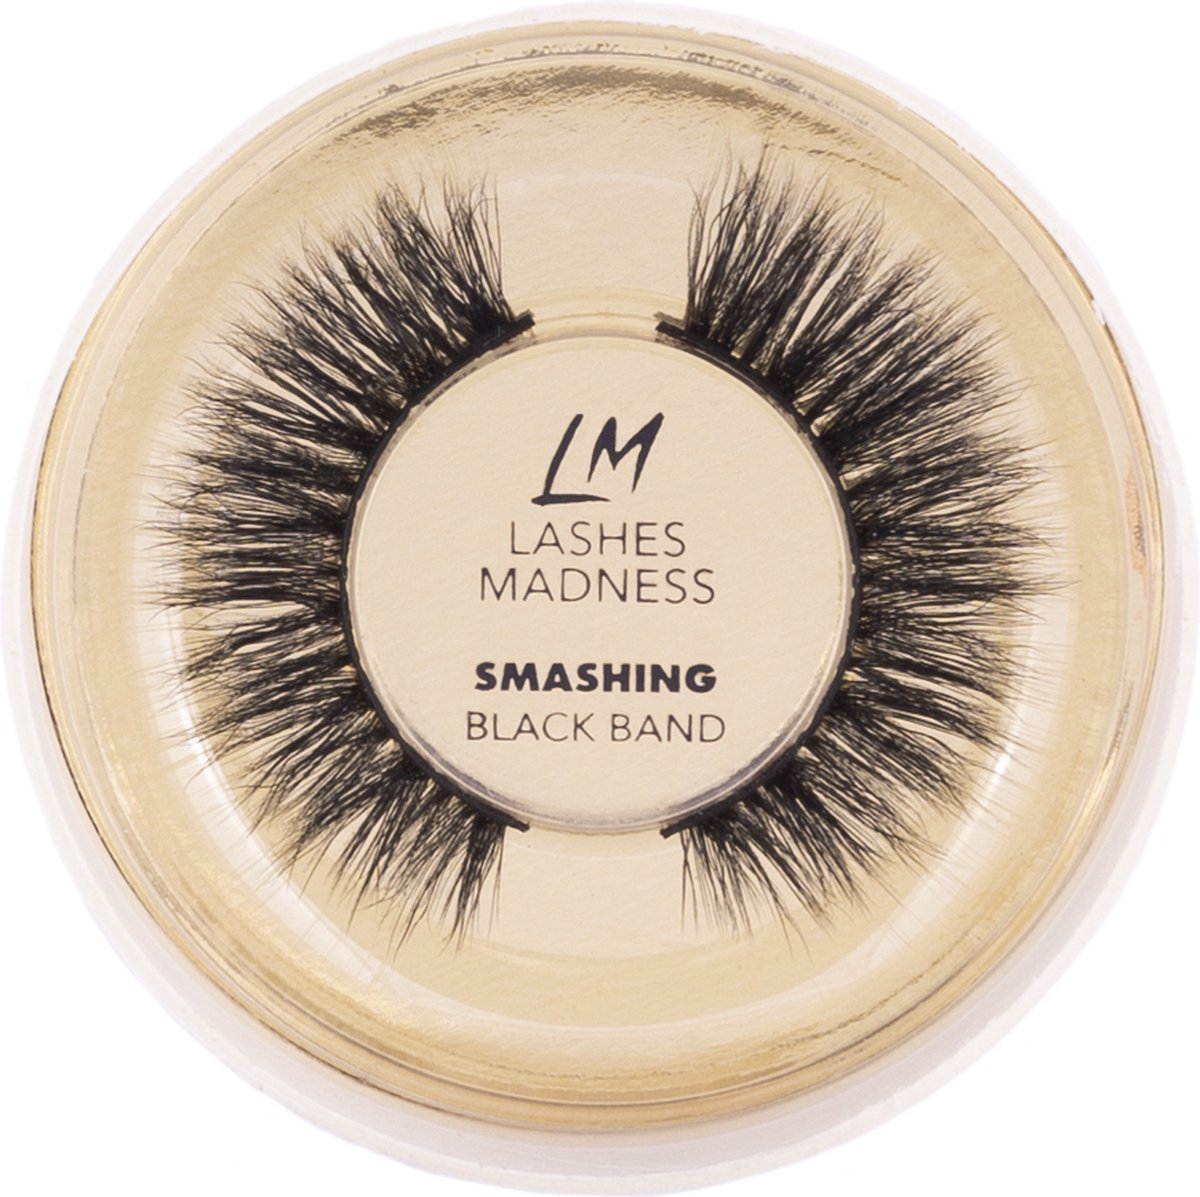 Lashes Madness - SMASHING - Black Band - Vegan Mink Lashes - Wimpers - Valse Wimpers - Eyelashes - Luxe Wimpers